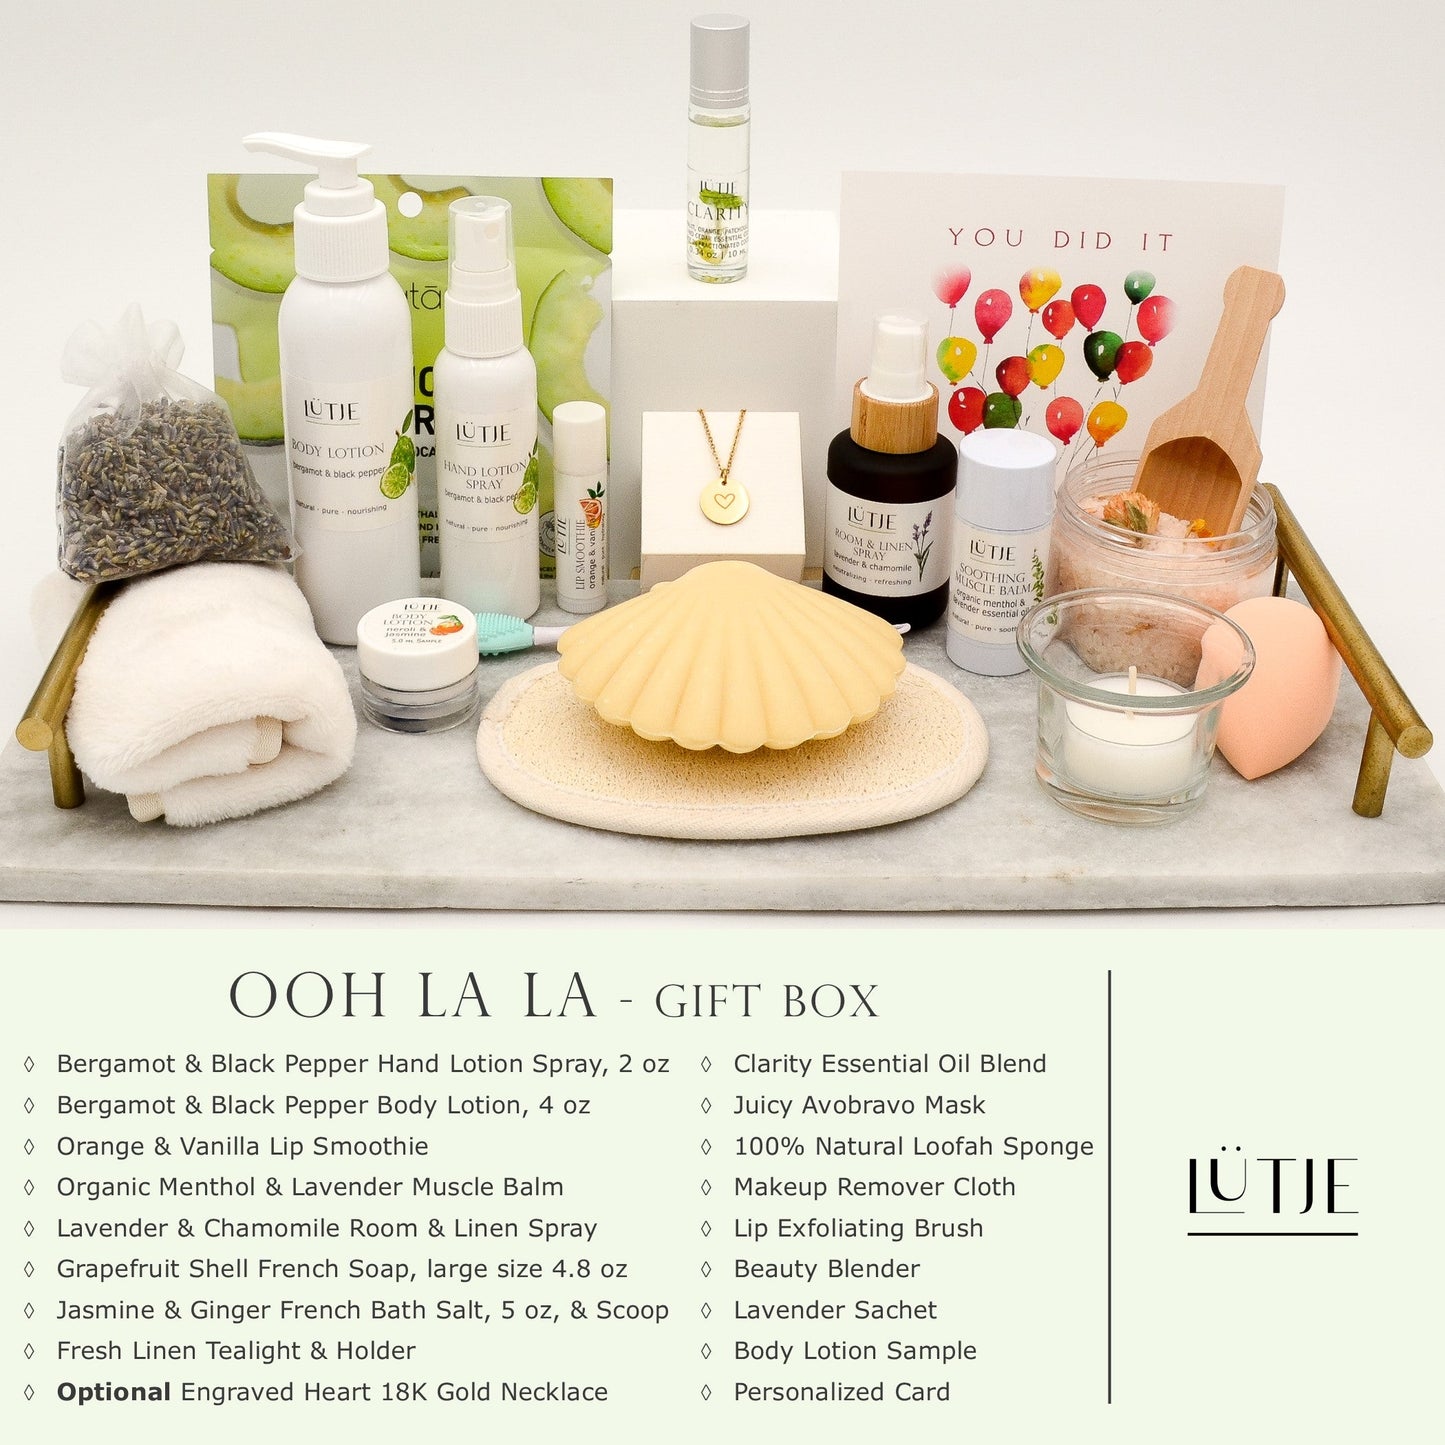 Ooh La La Gift Box for women, wife, daughter, BFF, sister, mom, or grandma, includes Bergamot & Black Pepper hand lotion spray and body lotion, essential oil, lip balm, soothing muscle balm, Lavender & Chamomile room & linen spray, French soap, French bath salts, hydrating face mask, other bath, spa and self-care items, and optional 18K gold-plated necklace with engraved heart.